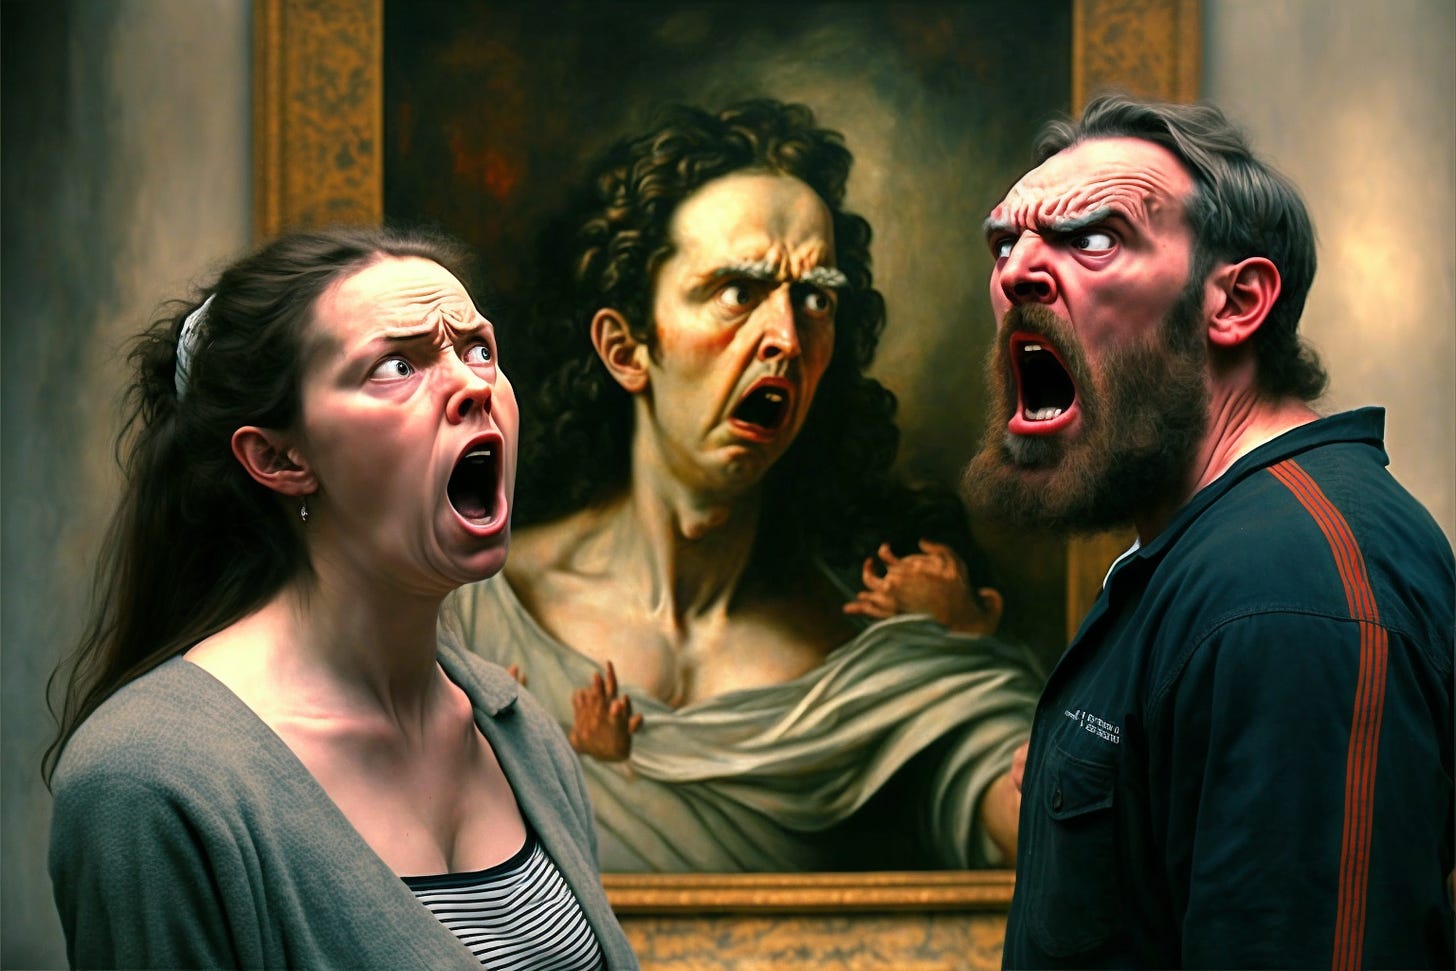 An AI-generated image of two people standing in front of an artwork in a gallery, yelling at each other with ridiculously over the top angry expressions on their faces.